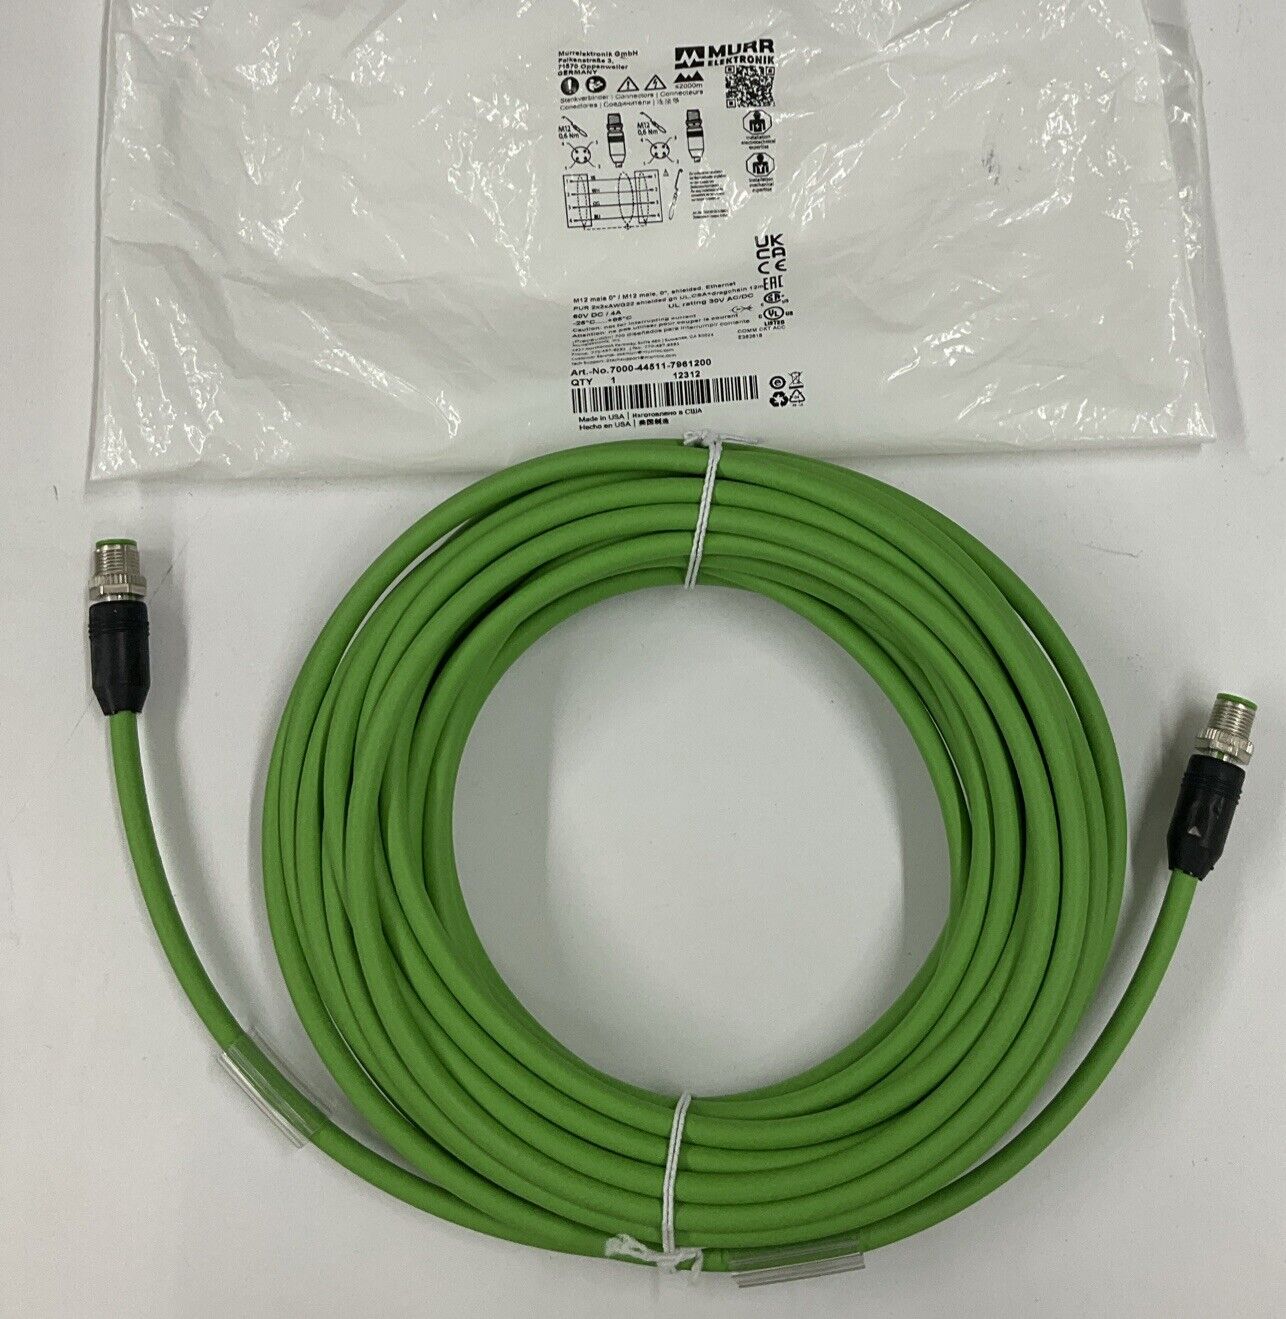 Murr 7000-44511-7961200 M12, Male/Male, 4-Pin, 12 Meters Ethernet Cable (CBL106) - 0